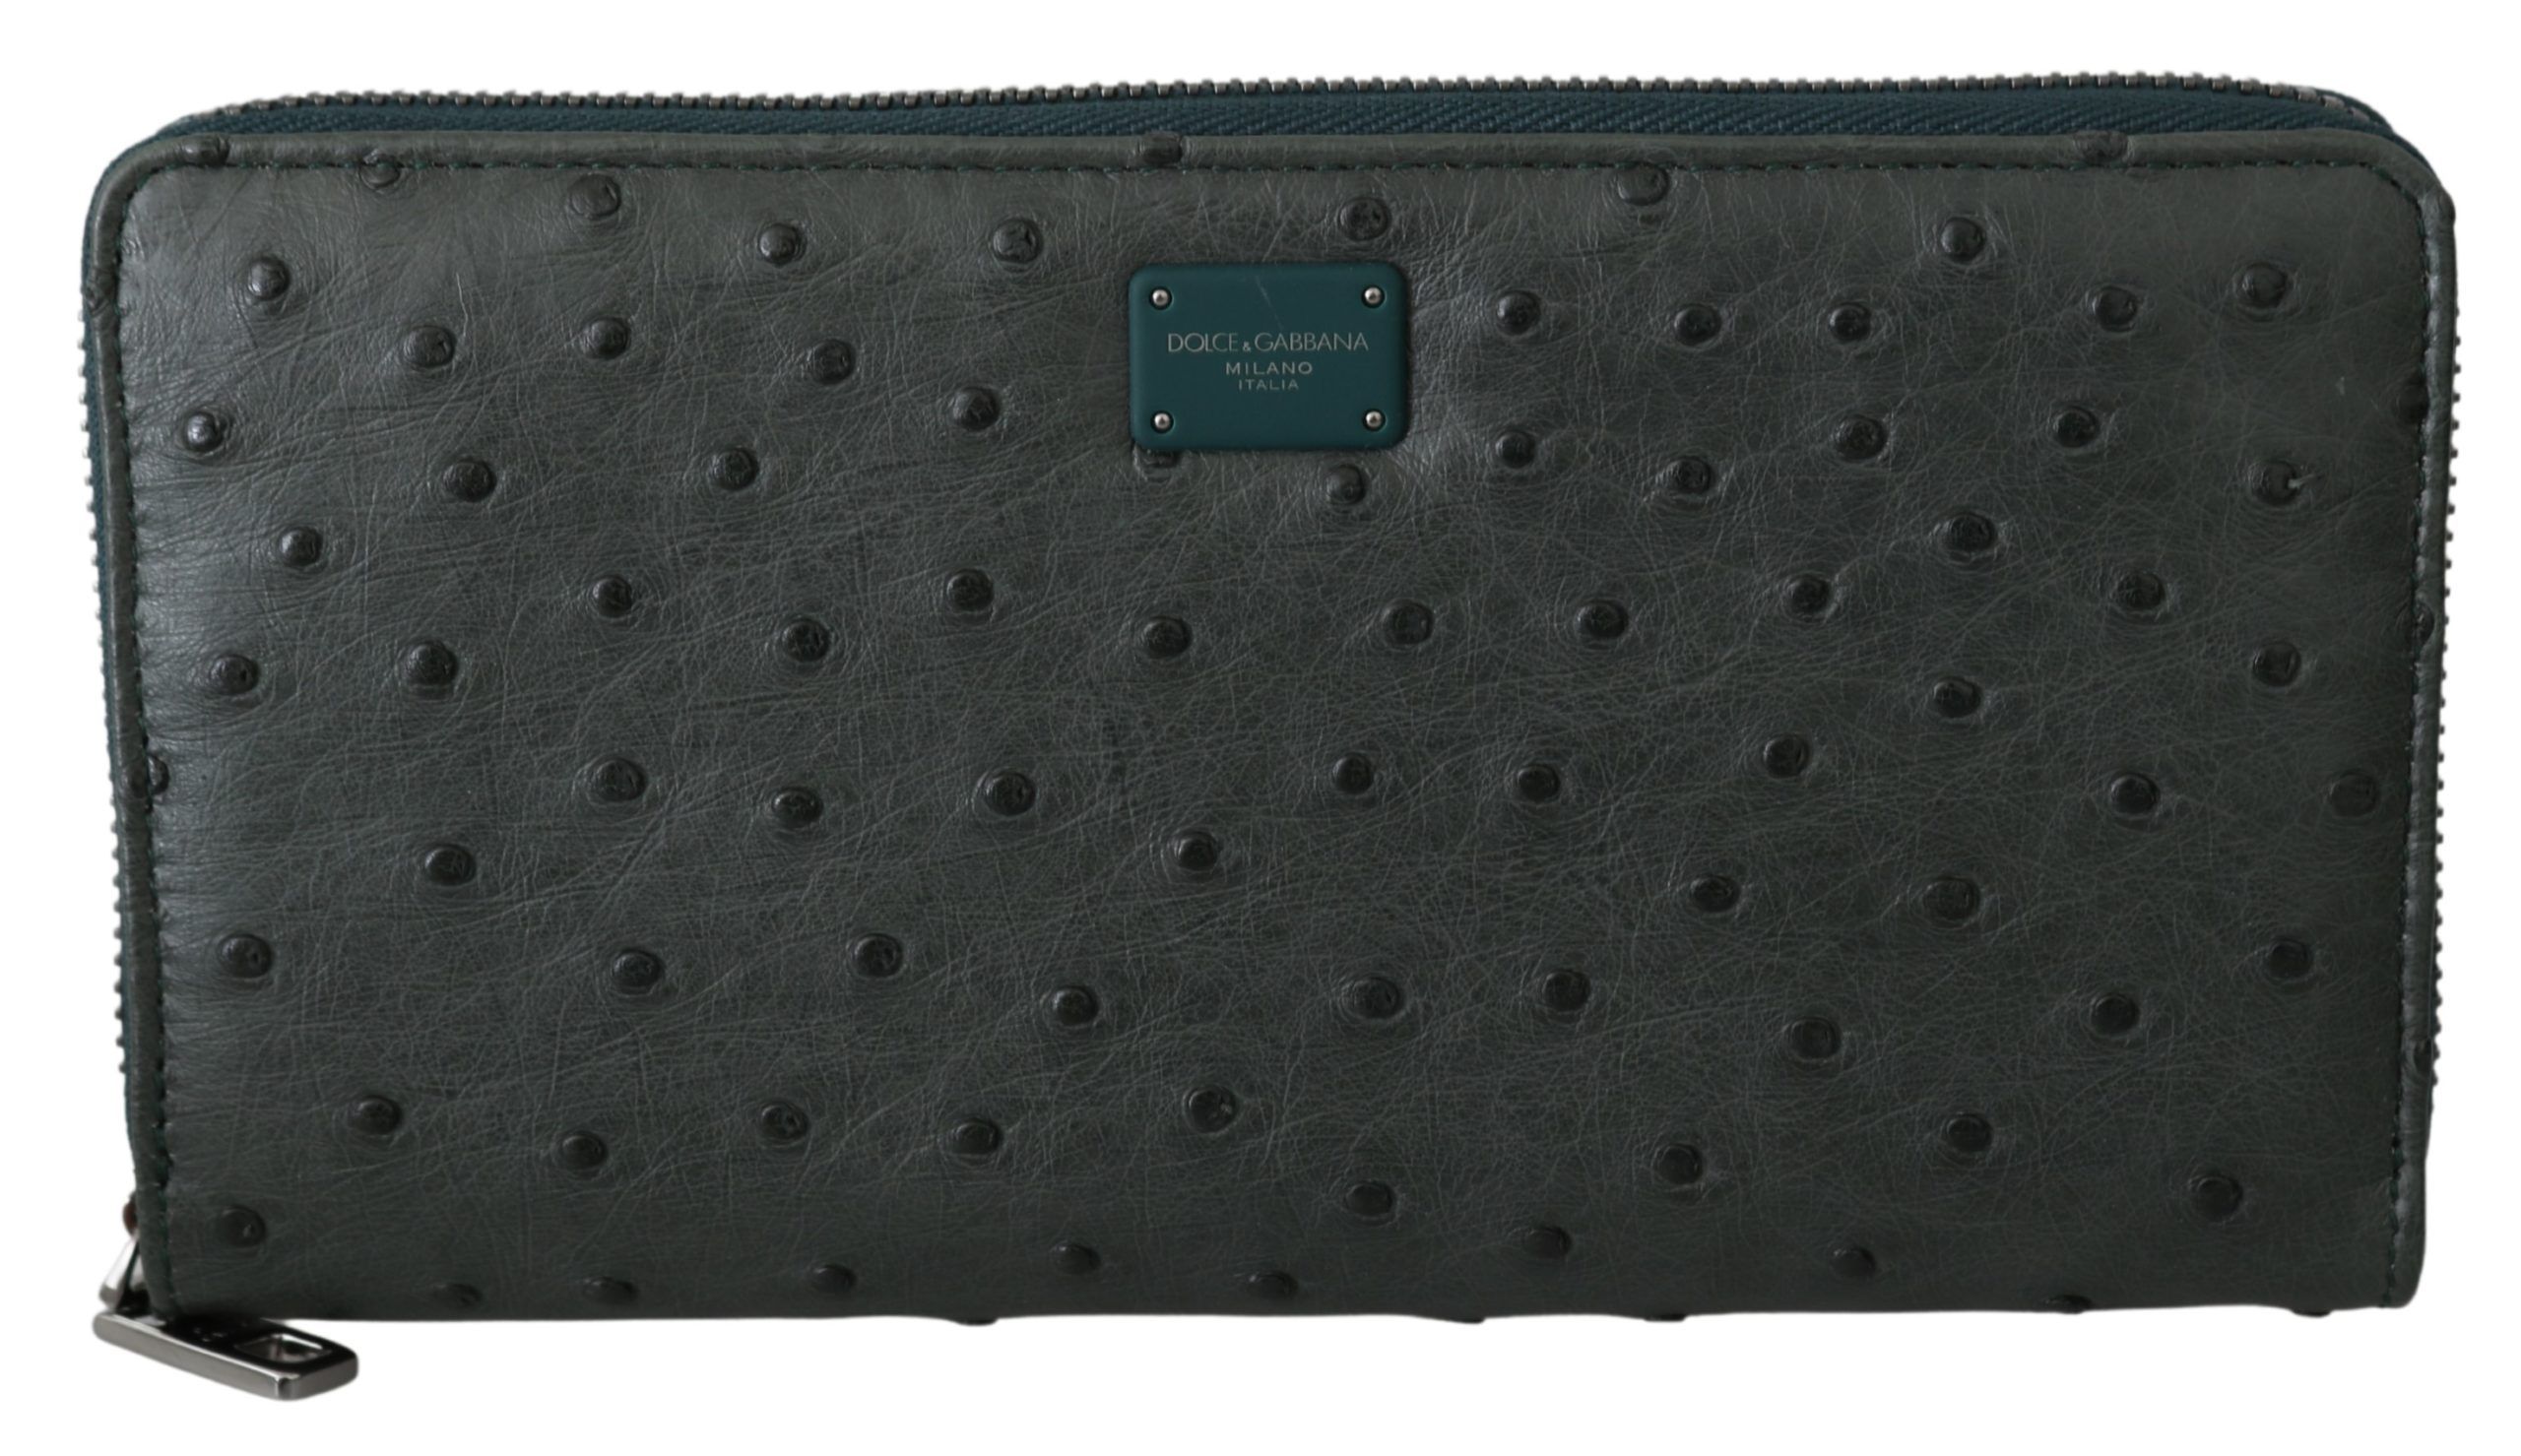 Green Dolce & Gabbana Exquisite Green Ostrich Leather Continental Wallet